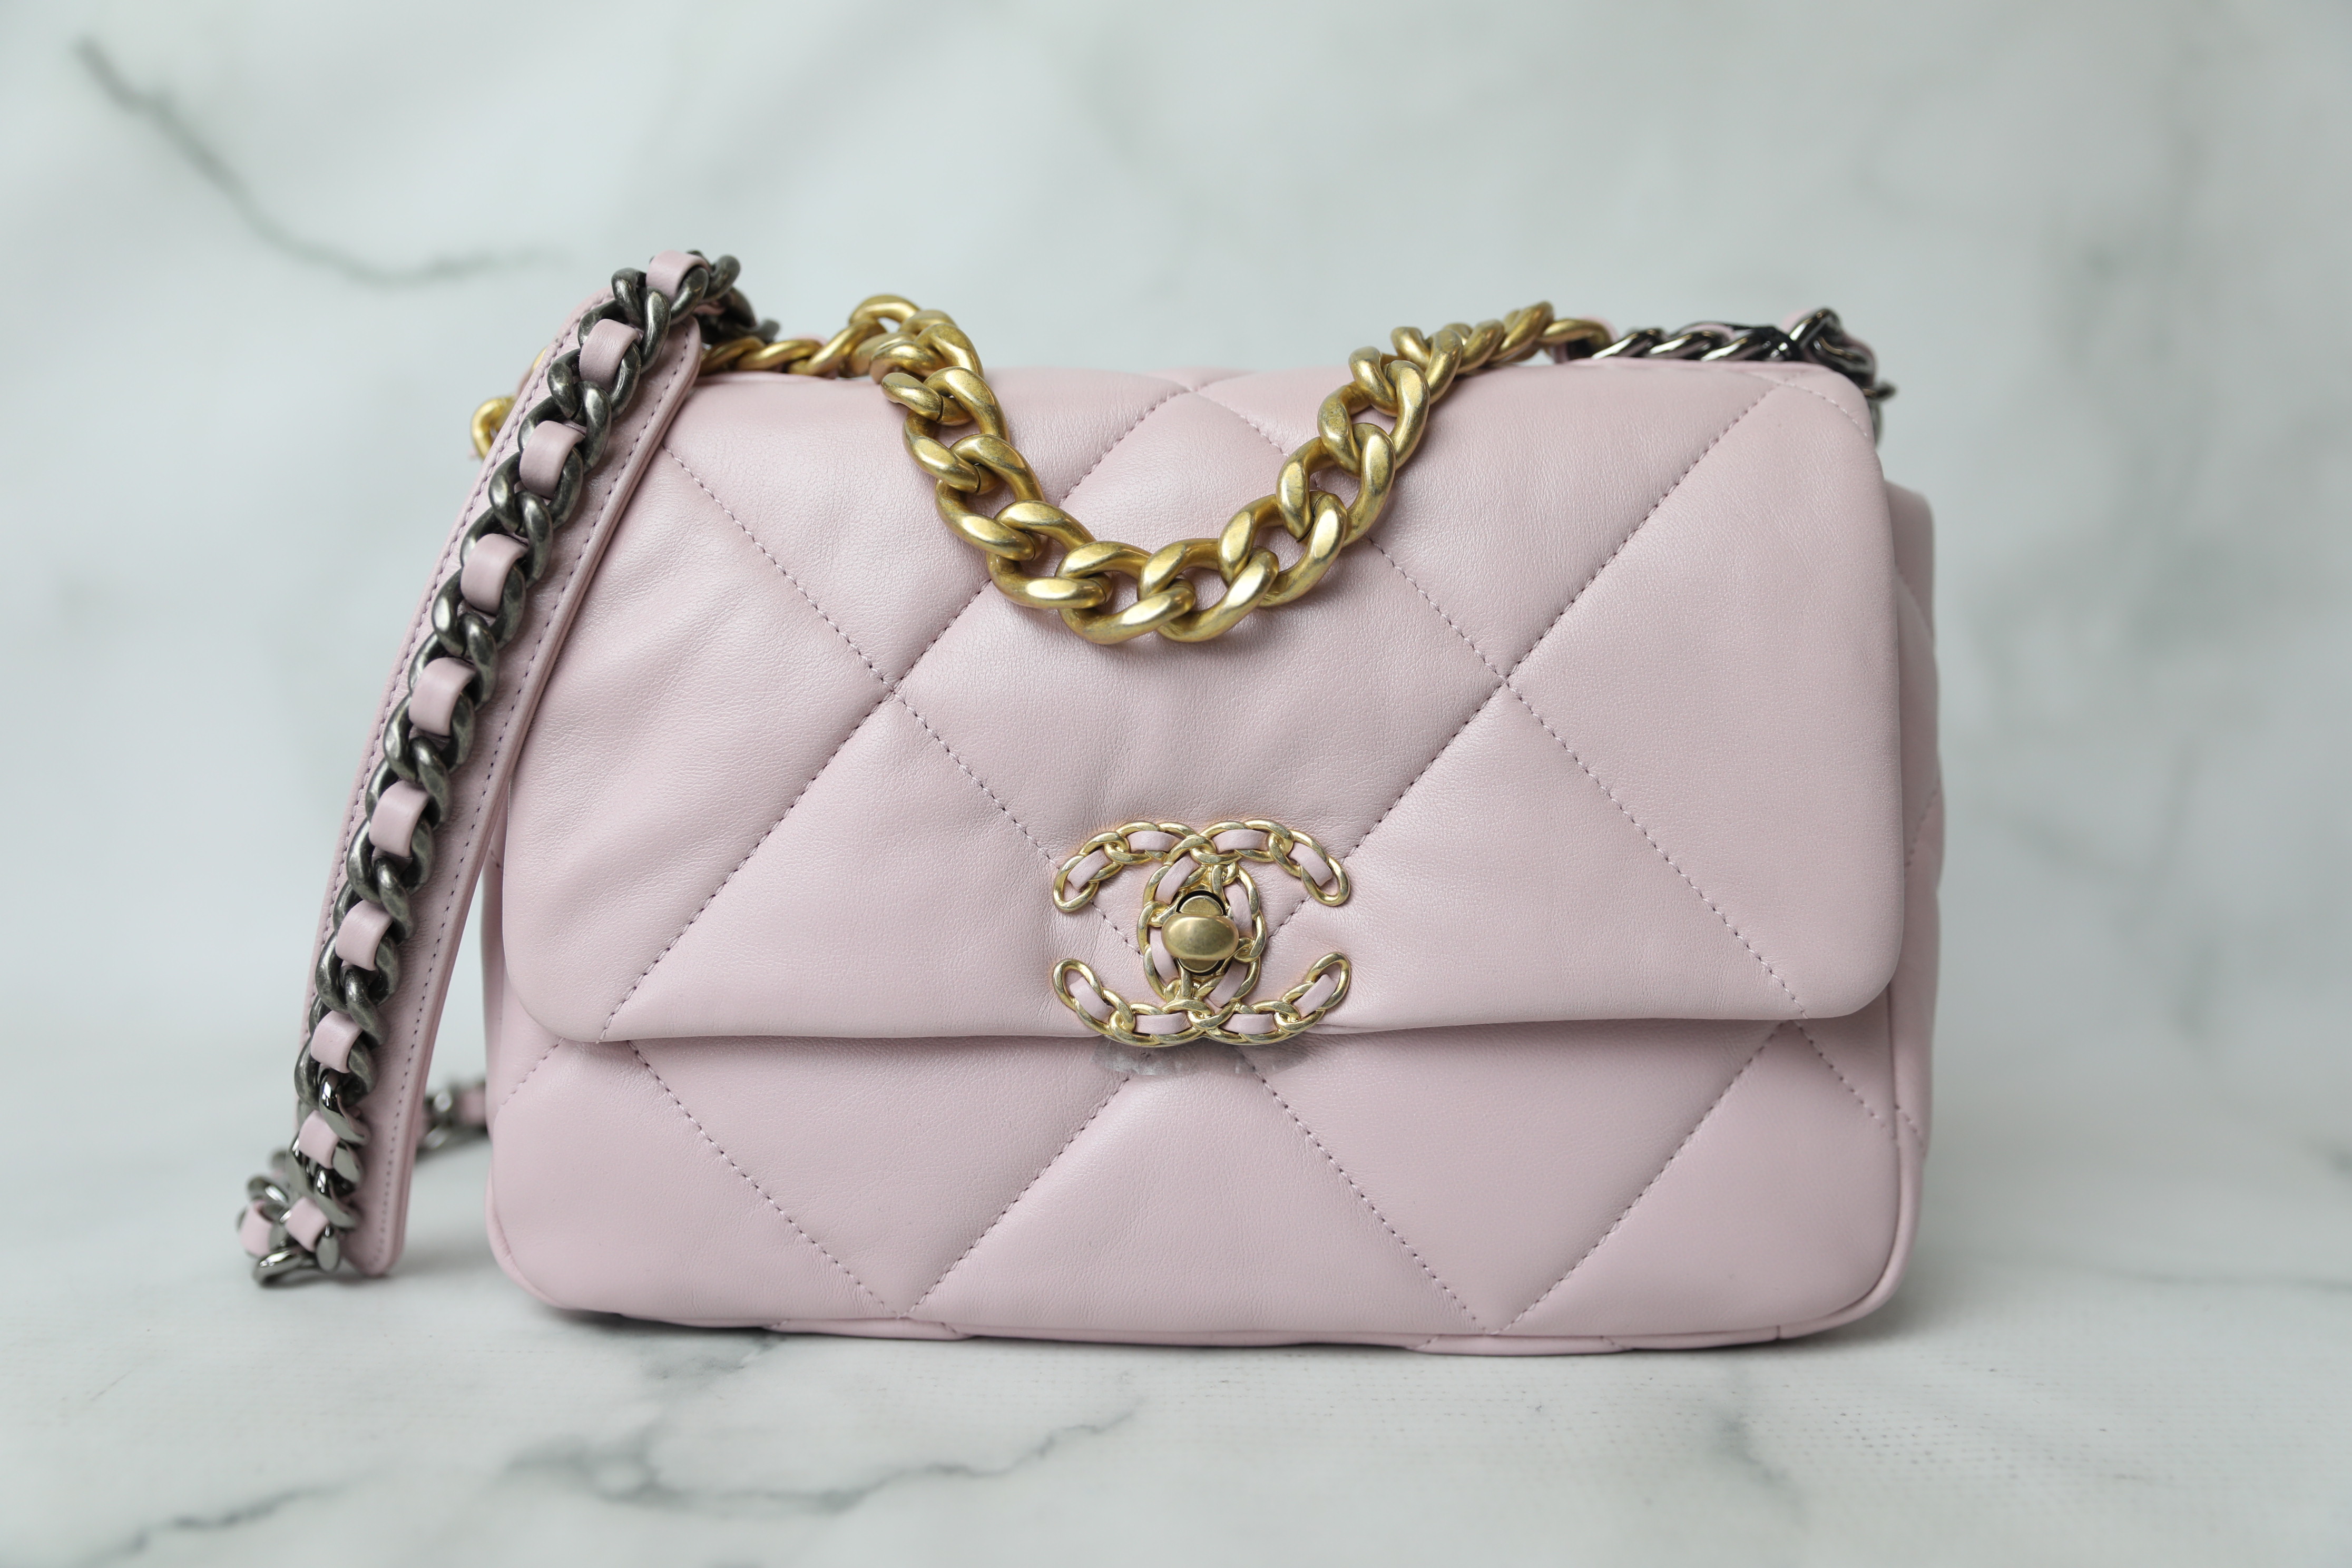 Chanel 19 leather handbag Chanel Pink in Leather - 16961768